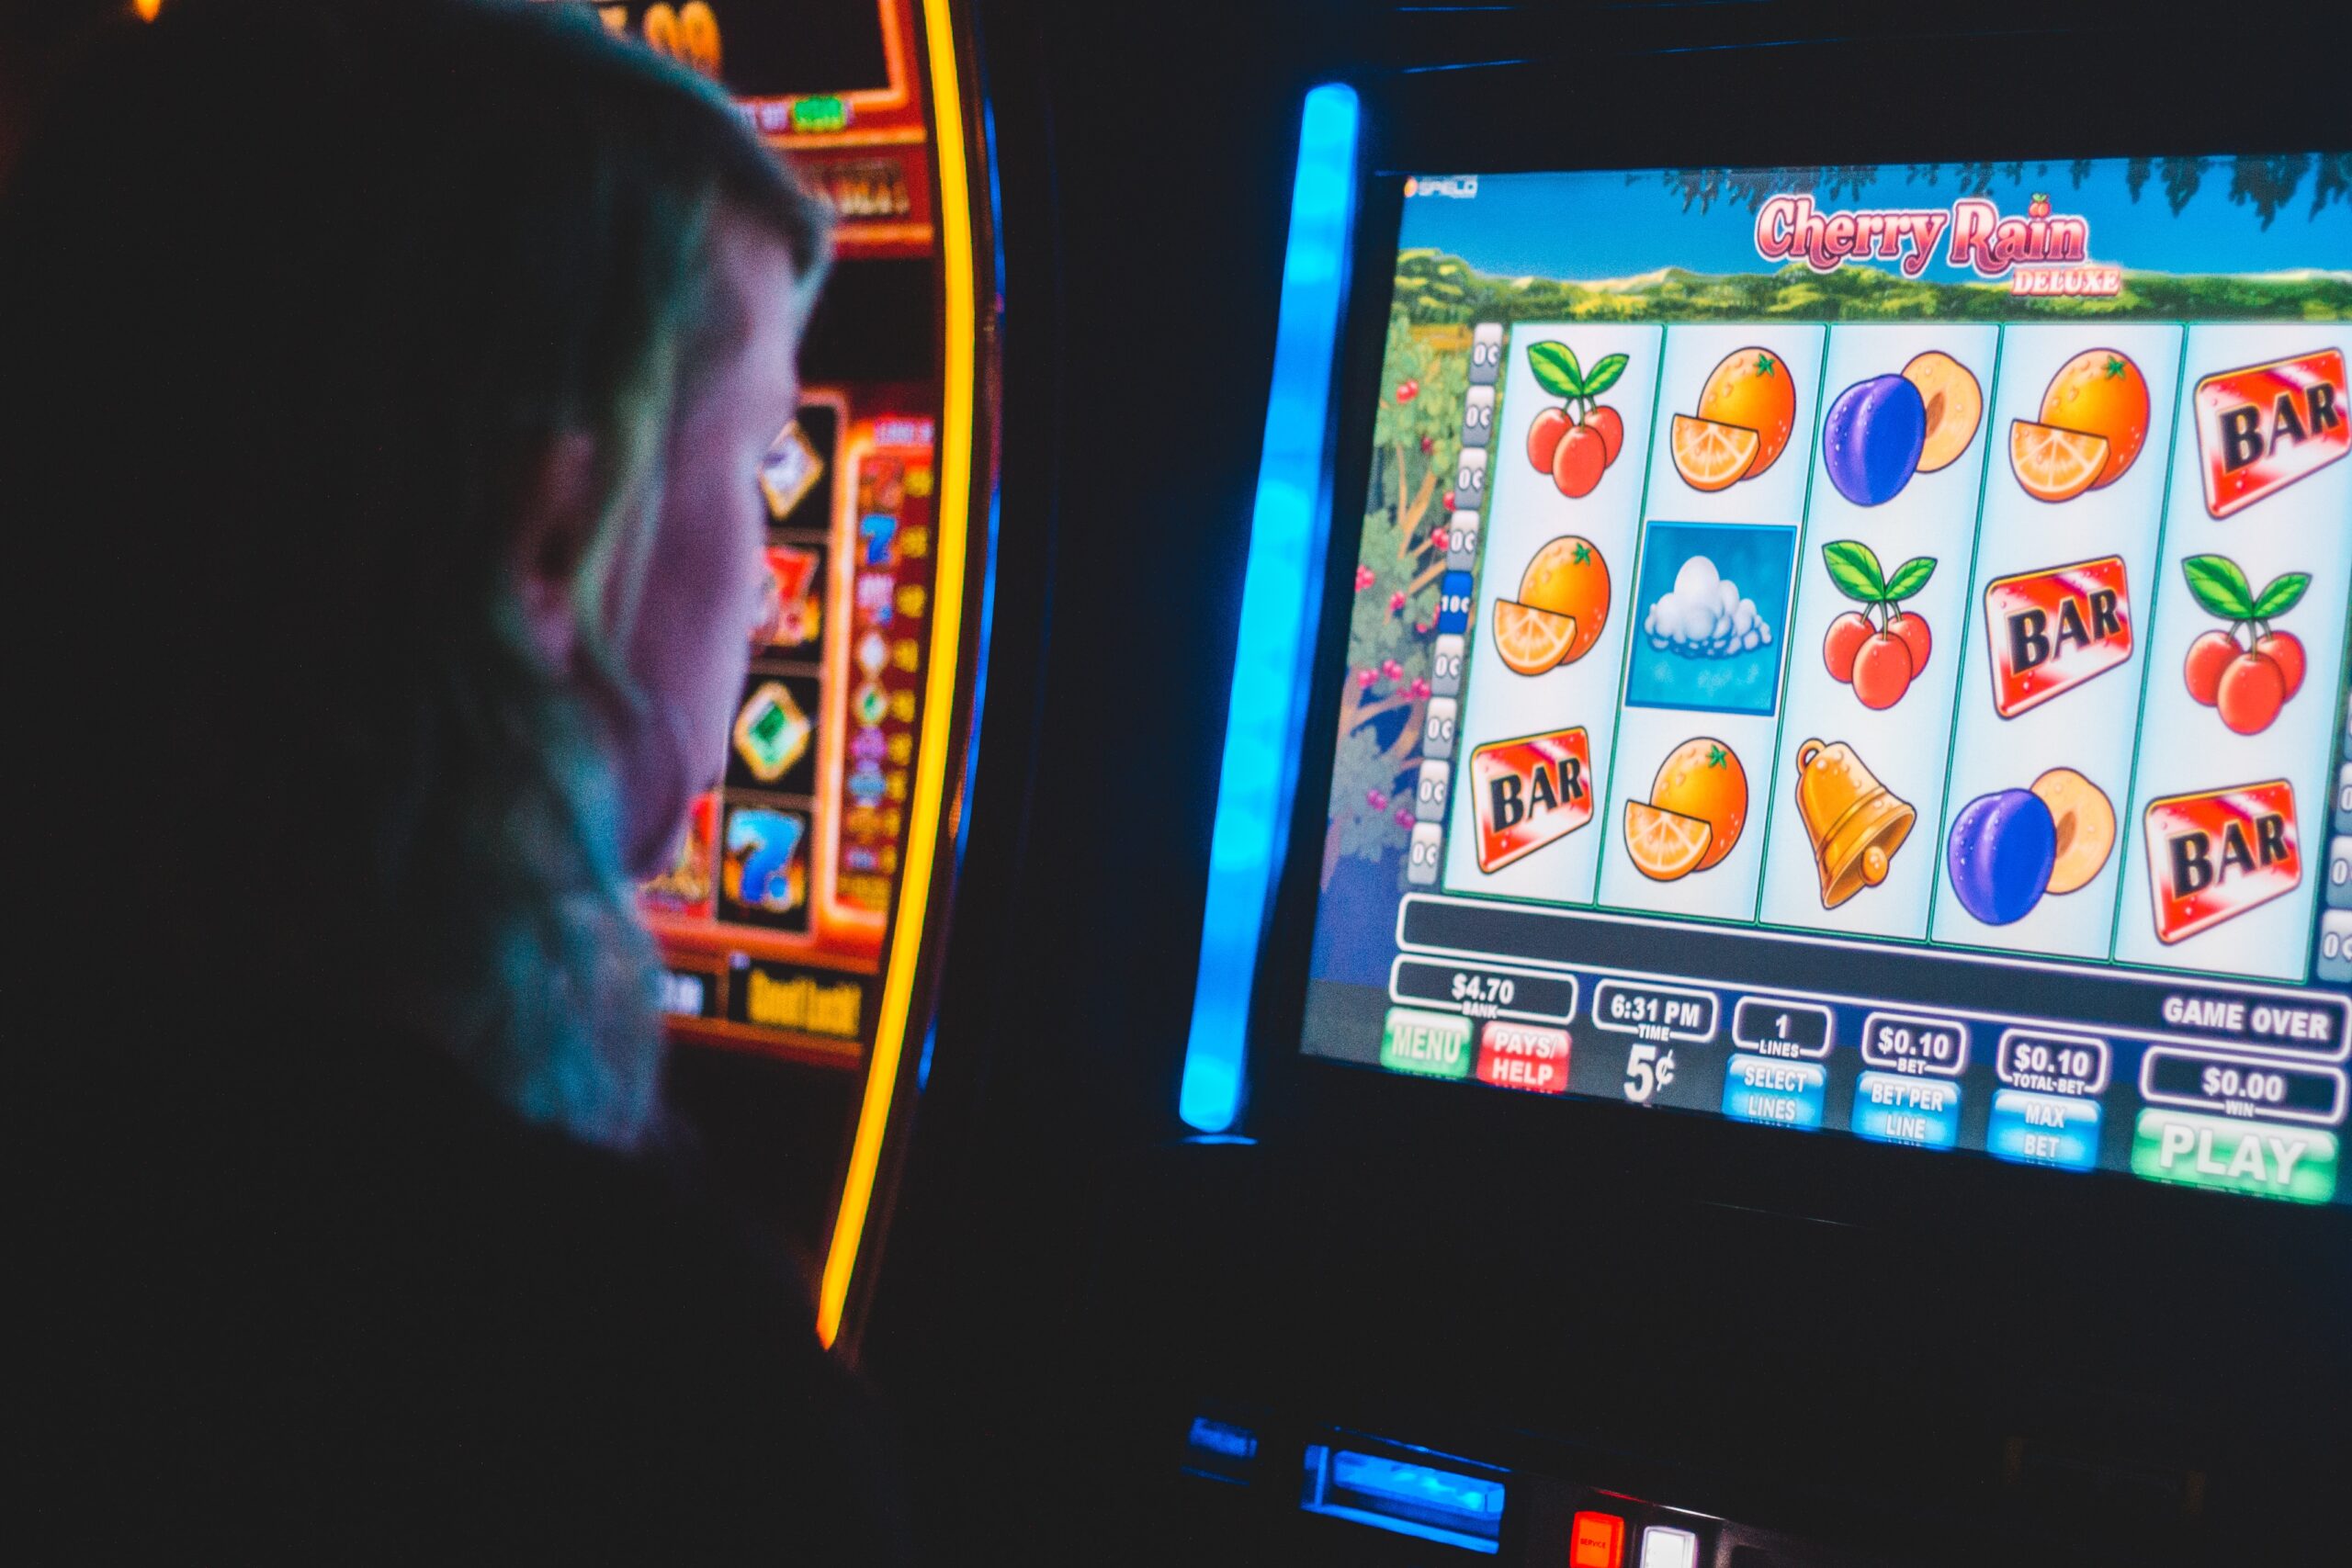 Regular Slots vs Progressive Slots: What is The Difference